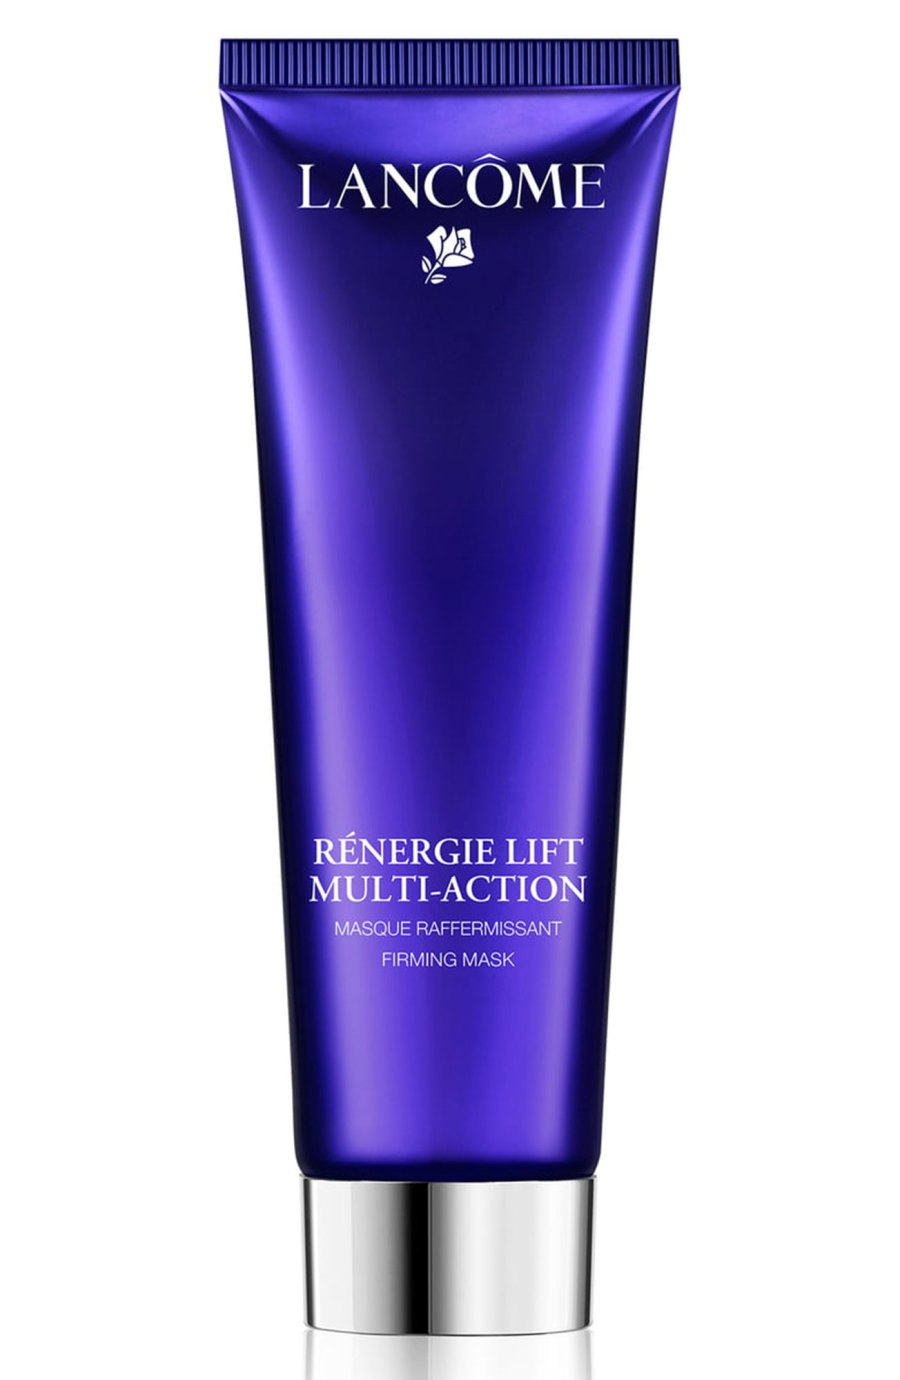 Lancome Renergie Life Multi-Action Firming Mask